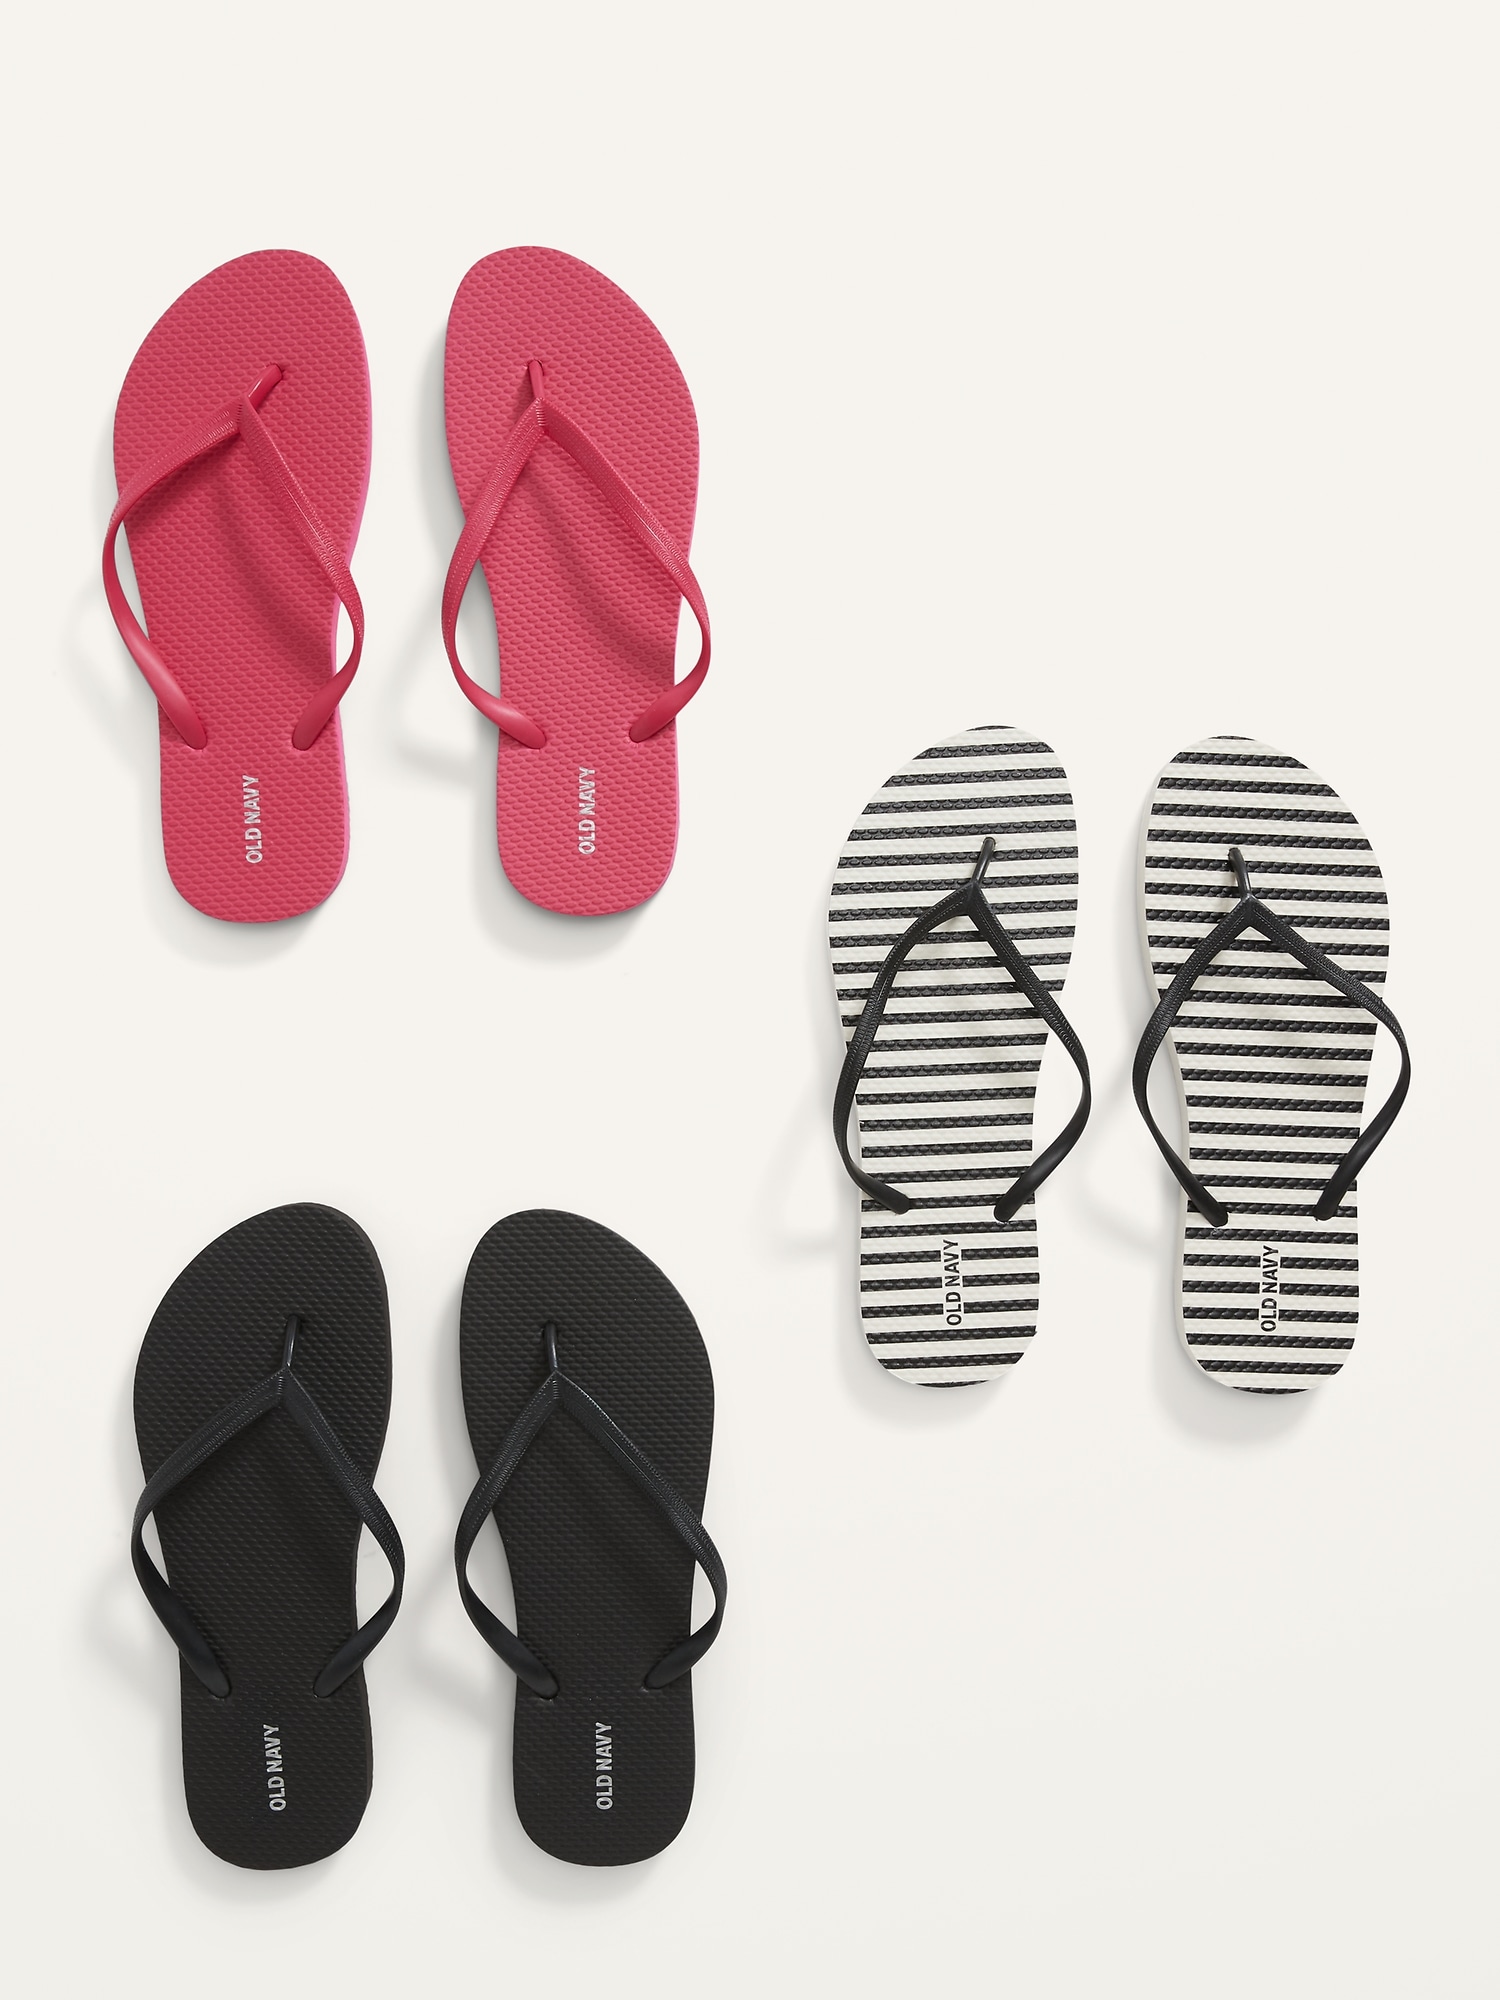 Voldoen Romanschrijver consensus Flip-Flop Sandals 3-Pack for Women (Partially Plant-Based) | Old Navy